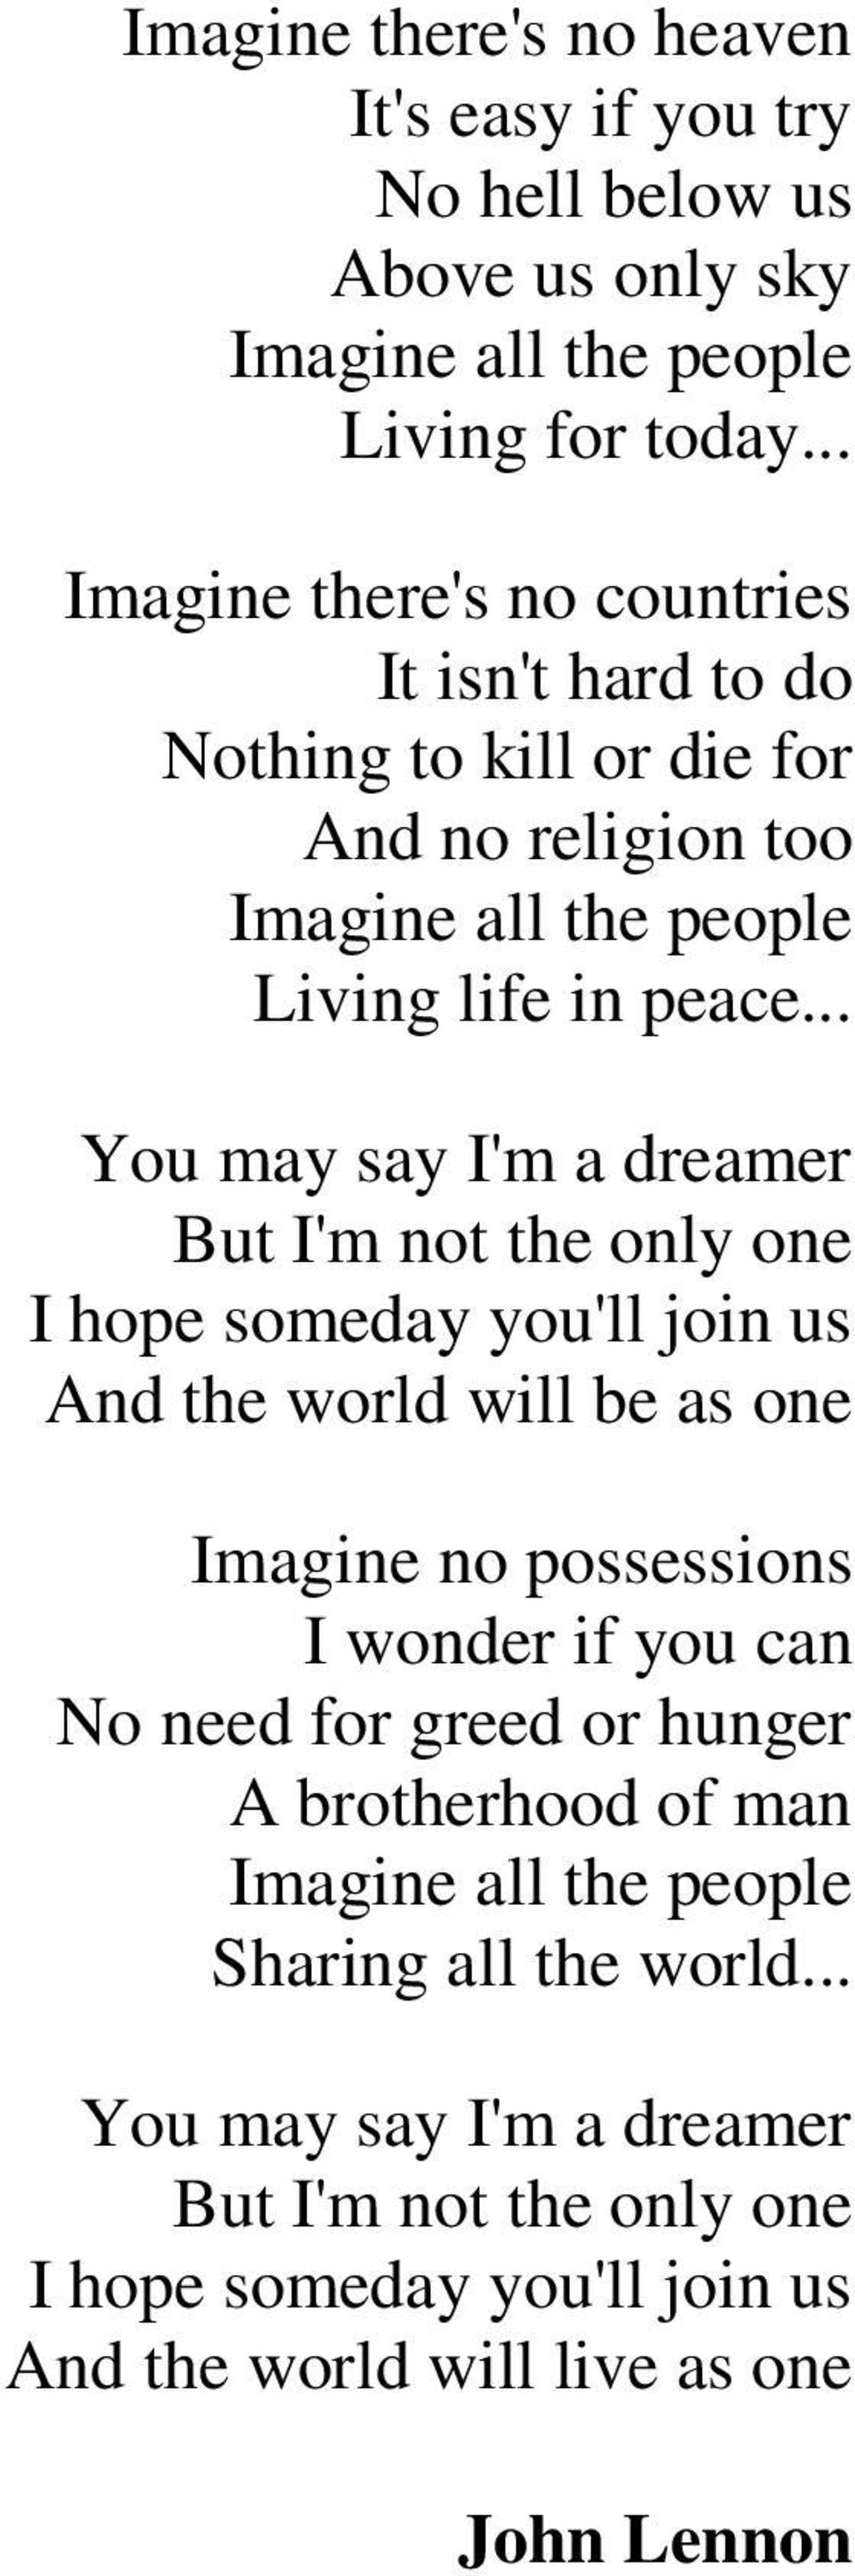 .. You may say I'm a dreamer But I'm not the only one I hope someday you'll join us And the world will be as one Imagine no possessions I wonder if you can No